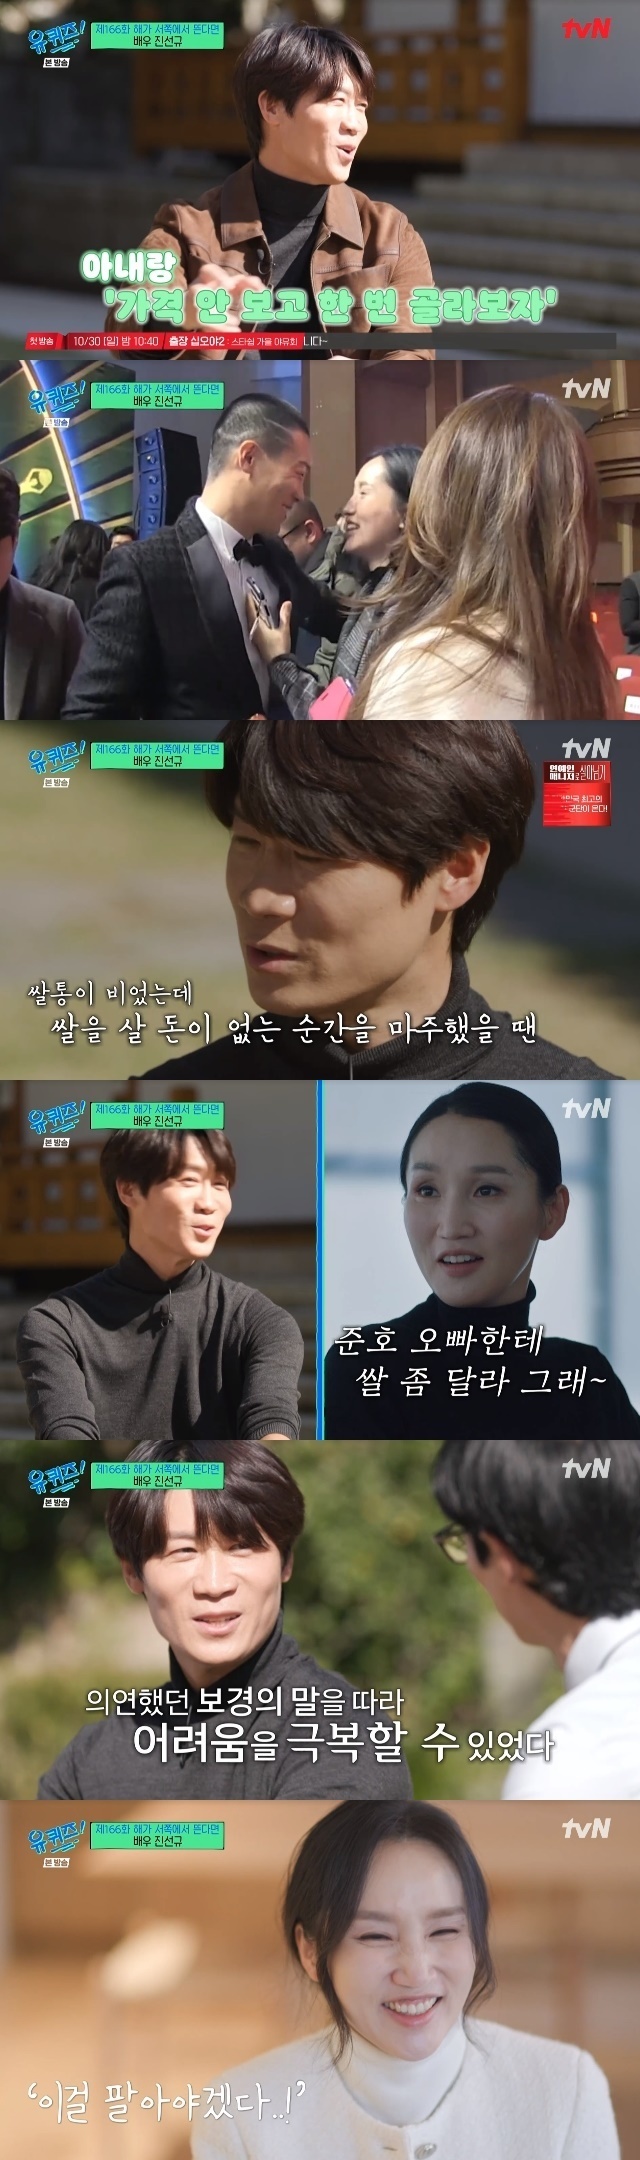 Jin Seon-kyu revealed his love for his wife from the past life and to the present.In the 166th episode of tvNs You Quiz on the Block (referred to as You Quiz on the Block), which aired on October 26, Actor Jin Seon-kyu appeared as a guest in a special episode of If the Sun Rises in the West.On this day, Jin Seon-kyu asked about the difference before and after the movie The Outlaws, saying, Many people recognize it, and it is also tangible ... Lets take a look at this price.When I was able to buy something for my juniors, things that I couldnt do before are a big change. I like that I can still keep it that way.When I recalled the time when I received the Best Supporting Actor Award at the Blue Dragon Film Festival in 2017, which gathered a lot of topics, Daehangno shook a little. I should not boast about it.When many of my colleagues in Daehangno, as well as the extreme families, came out as Jin Seon-kyu, I heard Wow. But I have never seen a testimonial at that time, he said. I should have prepared a shameful and coherent testimony, but I wanted to come down like a fool.However, Yoo Jae-Suk was warmly welcomed by many people because it was a sincere and sincere testimony.Jin Seon-kyu received a lot of responses after the Blue Dragon Film Festival, saying, Im in the water, so Im rowing. He said, I do not know exactly where to go.(So) I interviewed, Lets see the map before paddling. I thought it would be nice to go with my colleagues to see exactly what Im going to do with Gaya.I was really scared that my gaze was noticed and suddenly my position changed. It was my wife Park Bo-kyung who caught Jin Seon-kyu.My wife hugged me at the awards ceremony and said, Brother, wake up. Jin Seon-kyu said, I thought I should regain my mind in every part, revealing what I felt through my wife.Jin Seon-kyu continued to talk about his wife. Jin Seon-kyu first became interested in the two people who graduated after graduation.The salaries of these two people during the play are about 300,000 won.Jin Seon-kyu confessed to Life and that he had no money to buy Rice during his marriage, and that he could not borrow 2 million won from the bank because the card value was overdue.It was also his wife who comforted Jin Seon-kyu at this time. Jin Seon-kyu said, My wife said, Its okay.He said, My wife is older than me, he said.Park Bo-kyung, who showed his face through interviews with the production crew, vividly remembers that he bought Rice by selling gold necklaces that his mother had done during his high school days.Jin Seon-kyu did not forget to thank Park Bo-kyung at the Blue Dragon Film Festival Awards. Jin Seon-kyu said,I have to do well from now on, but I liked it so much, he recalled his wife at the time and showed tears.On the other hand, Park Bo-kyung received much attention as a villain Coriander in the TVN drama Little Women, which recently opened.It was a role she won through an audition on her own, without revealing that she was Jin Seon-kyus wife.Jin Seon-kyu said, I dont know how to explain this moment. It was last year when my wife gave up all her dreams and spent eight years raising and supporting me, and then the children grew up and auditioned.I talked about Honey Cheer up and Lets do well, but at some point I played Coriander. The Outlaws I think that time has come to my wife as many people have recognized me.I hope it goes well, he said frankly.Now I want to open a chapter so that my wife can achieve what she dreams of. My wife is good at acting and doing a lot of work. Keep going, honey.I can see the kids when I go to shoot, he said.